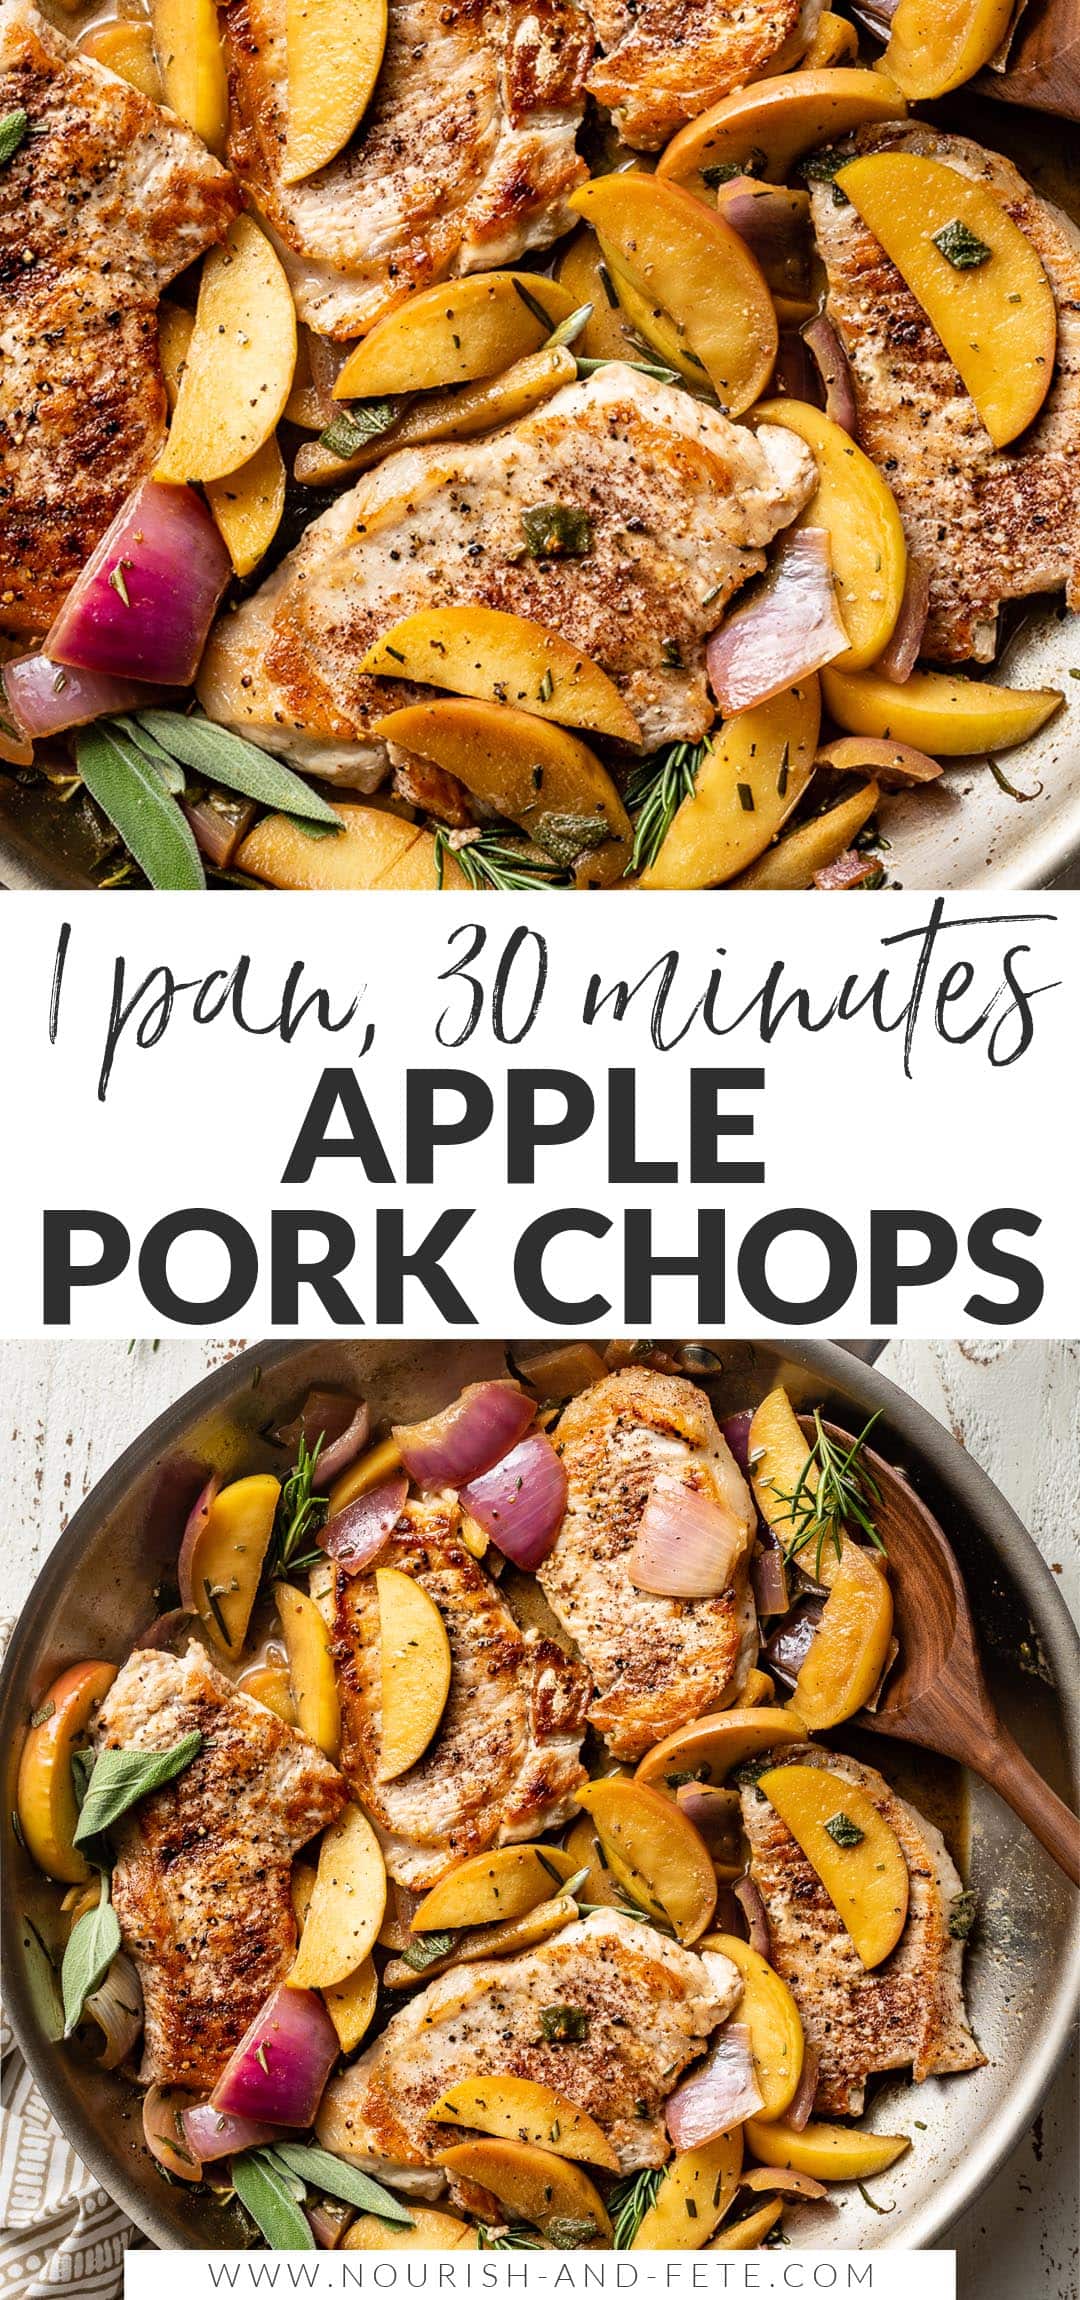 Pork Chops with Apples and Onions - Nourish and Fete